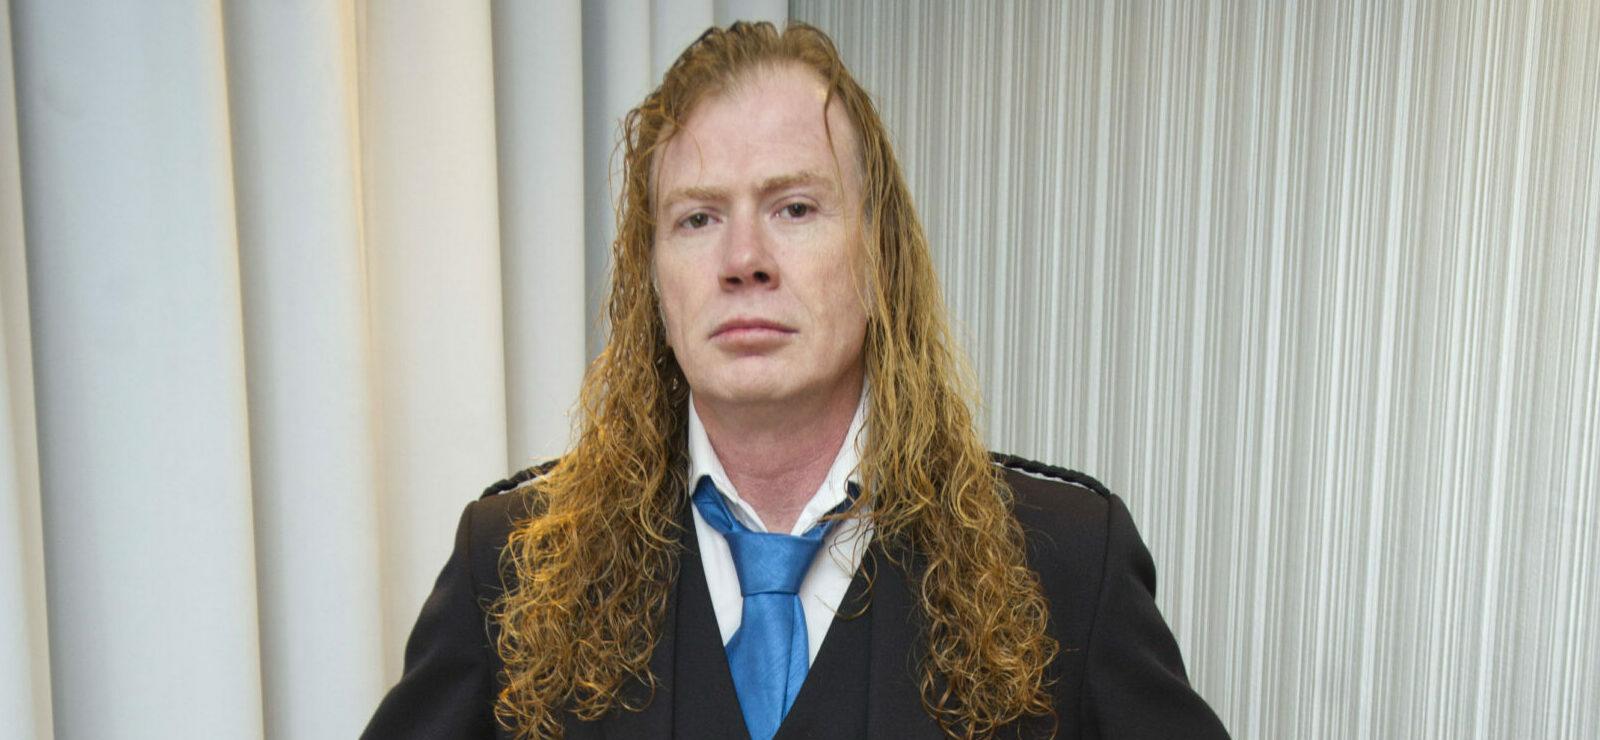 Megadeth frontman Dave Mustaine